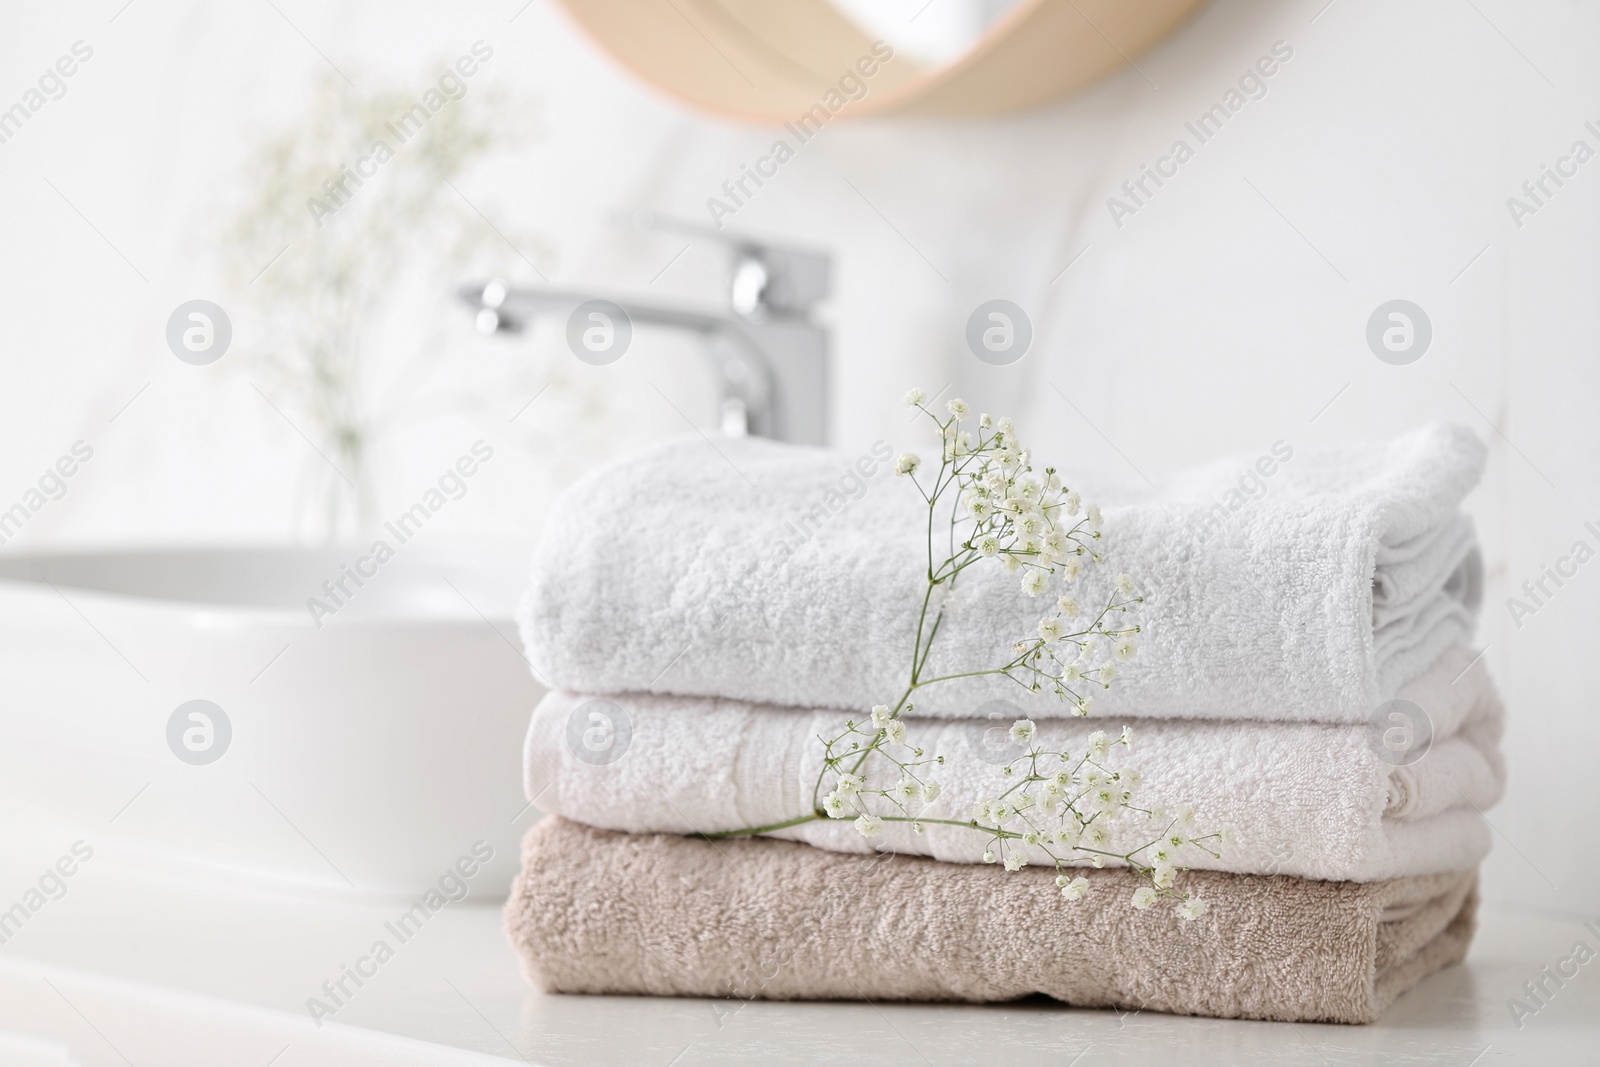 Photo of Clean towels and flowers on counter in bathroom